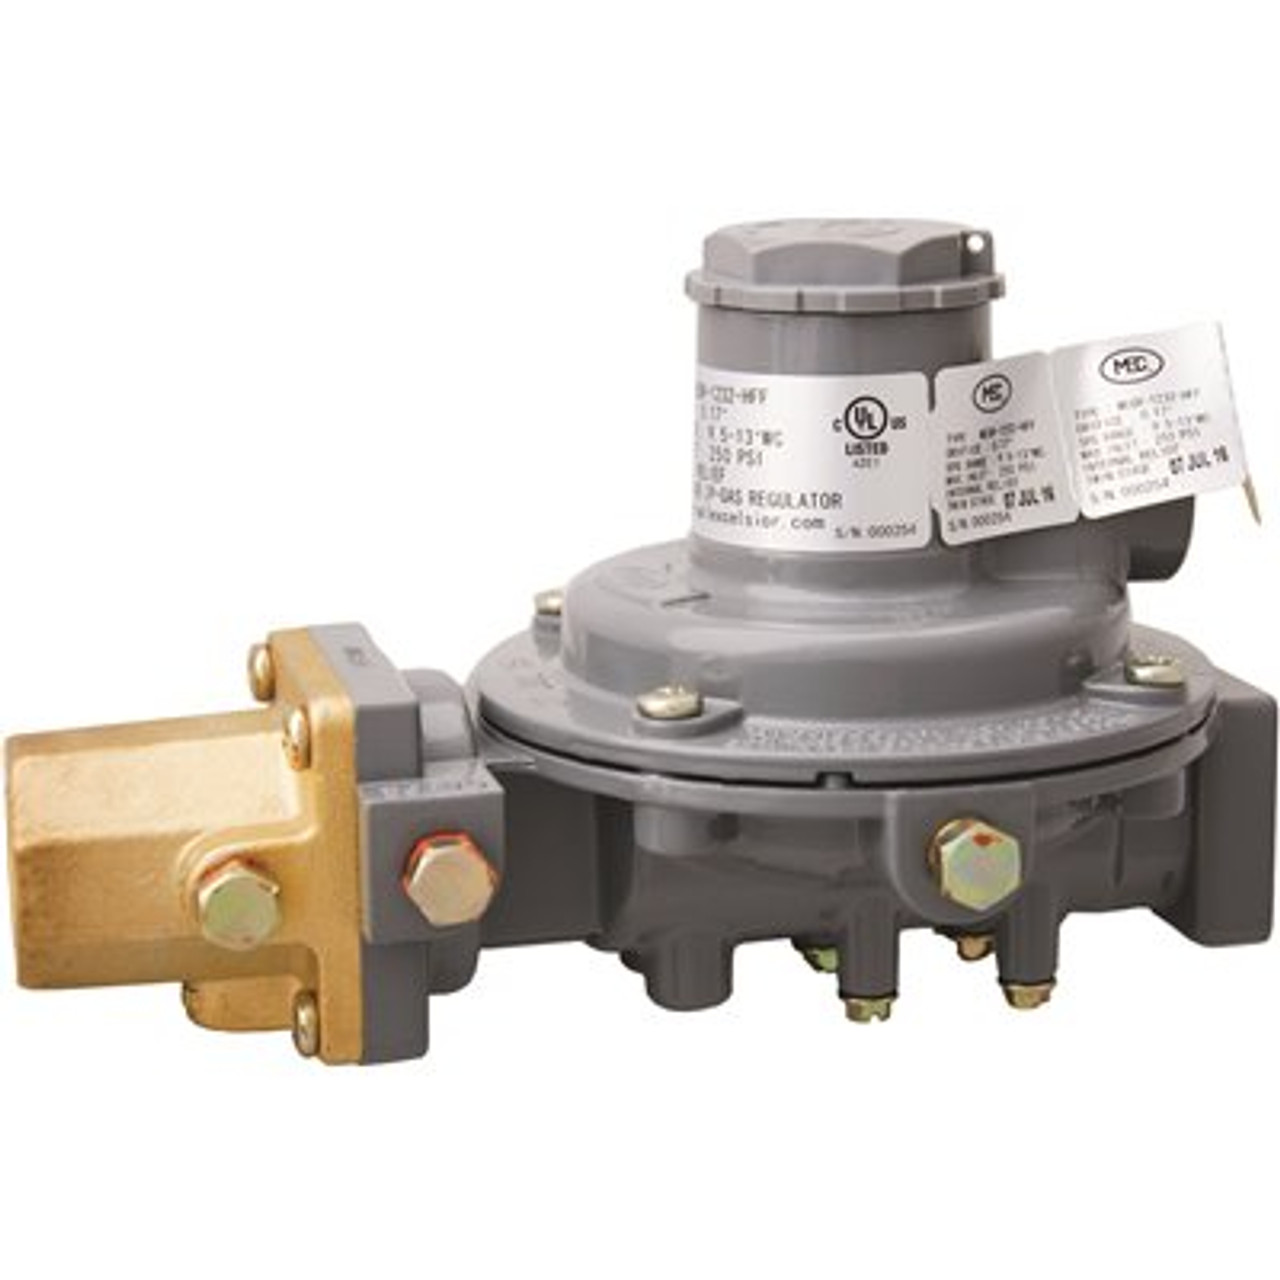 Excela-Flo MEC Compact High Capacity Twin Stage Regulator F.Pol Inlet x 3/4 in. FNPT Outlet - 625,000 BTU/Hour